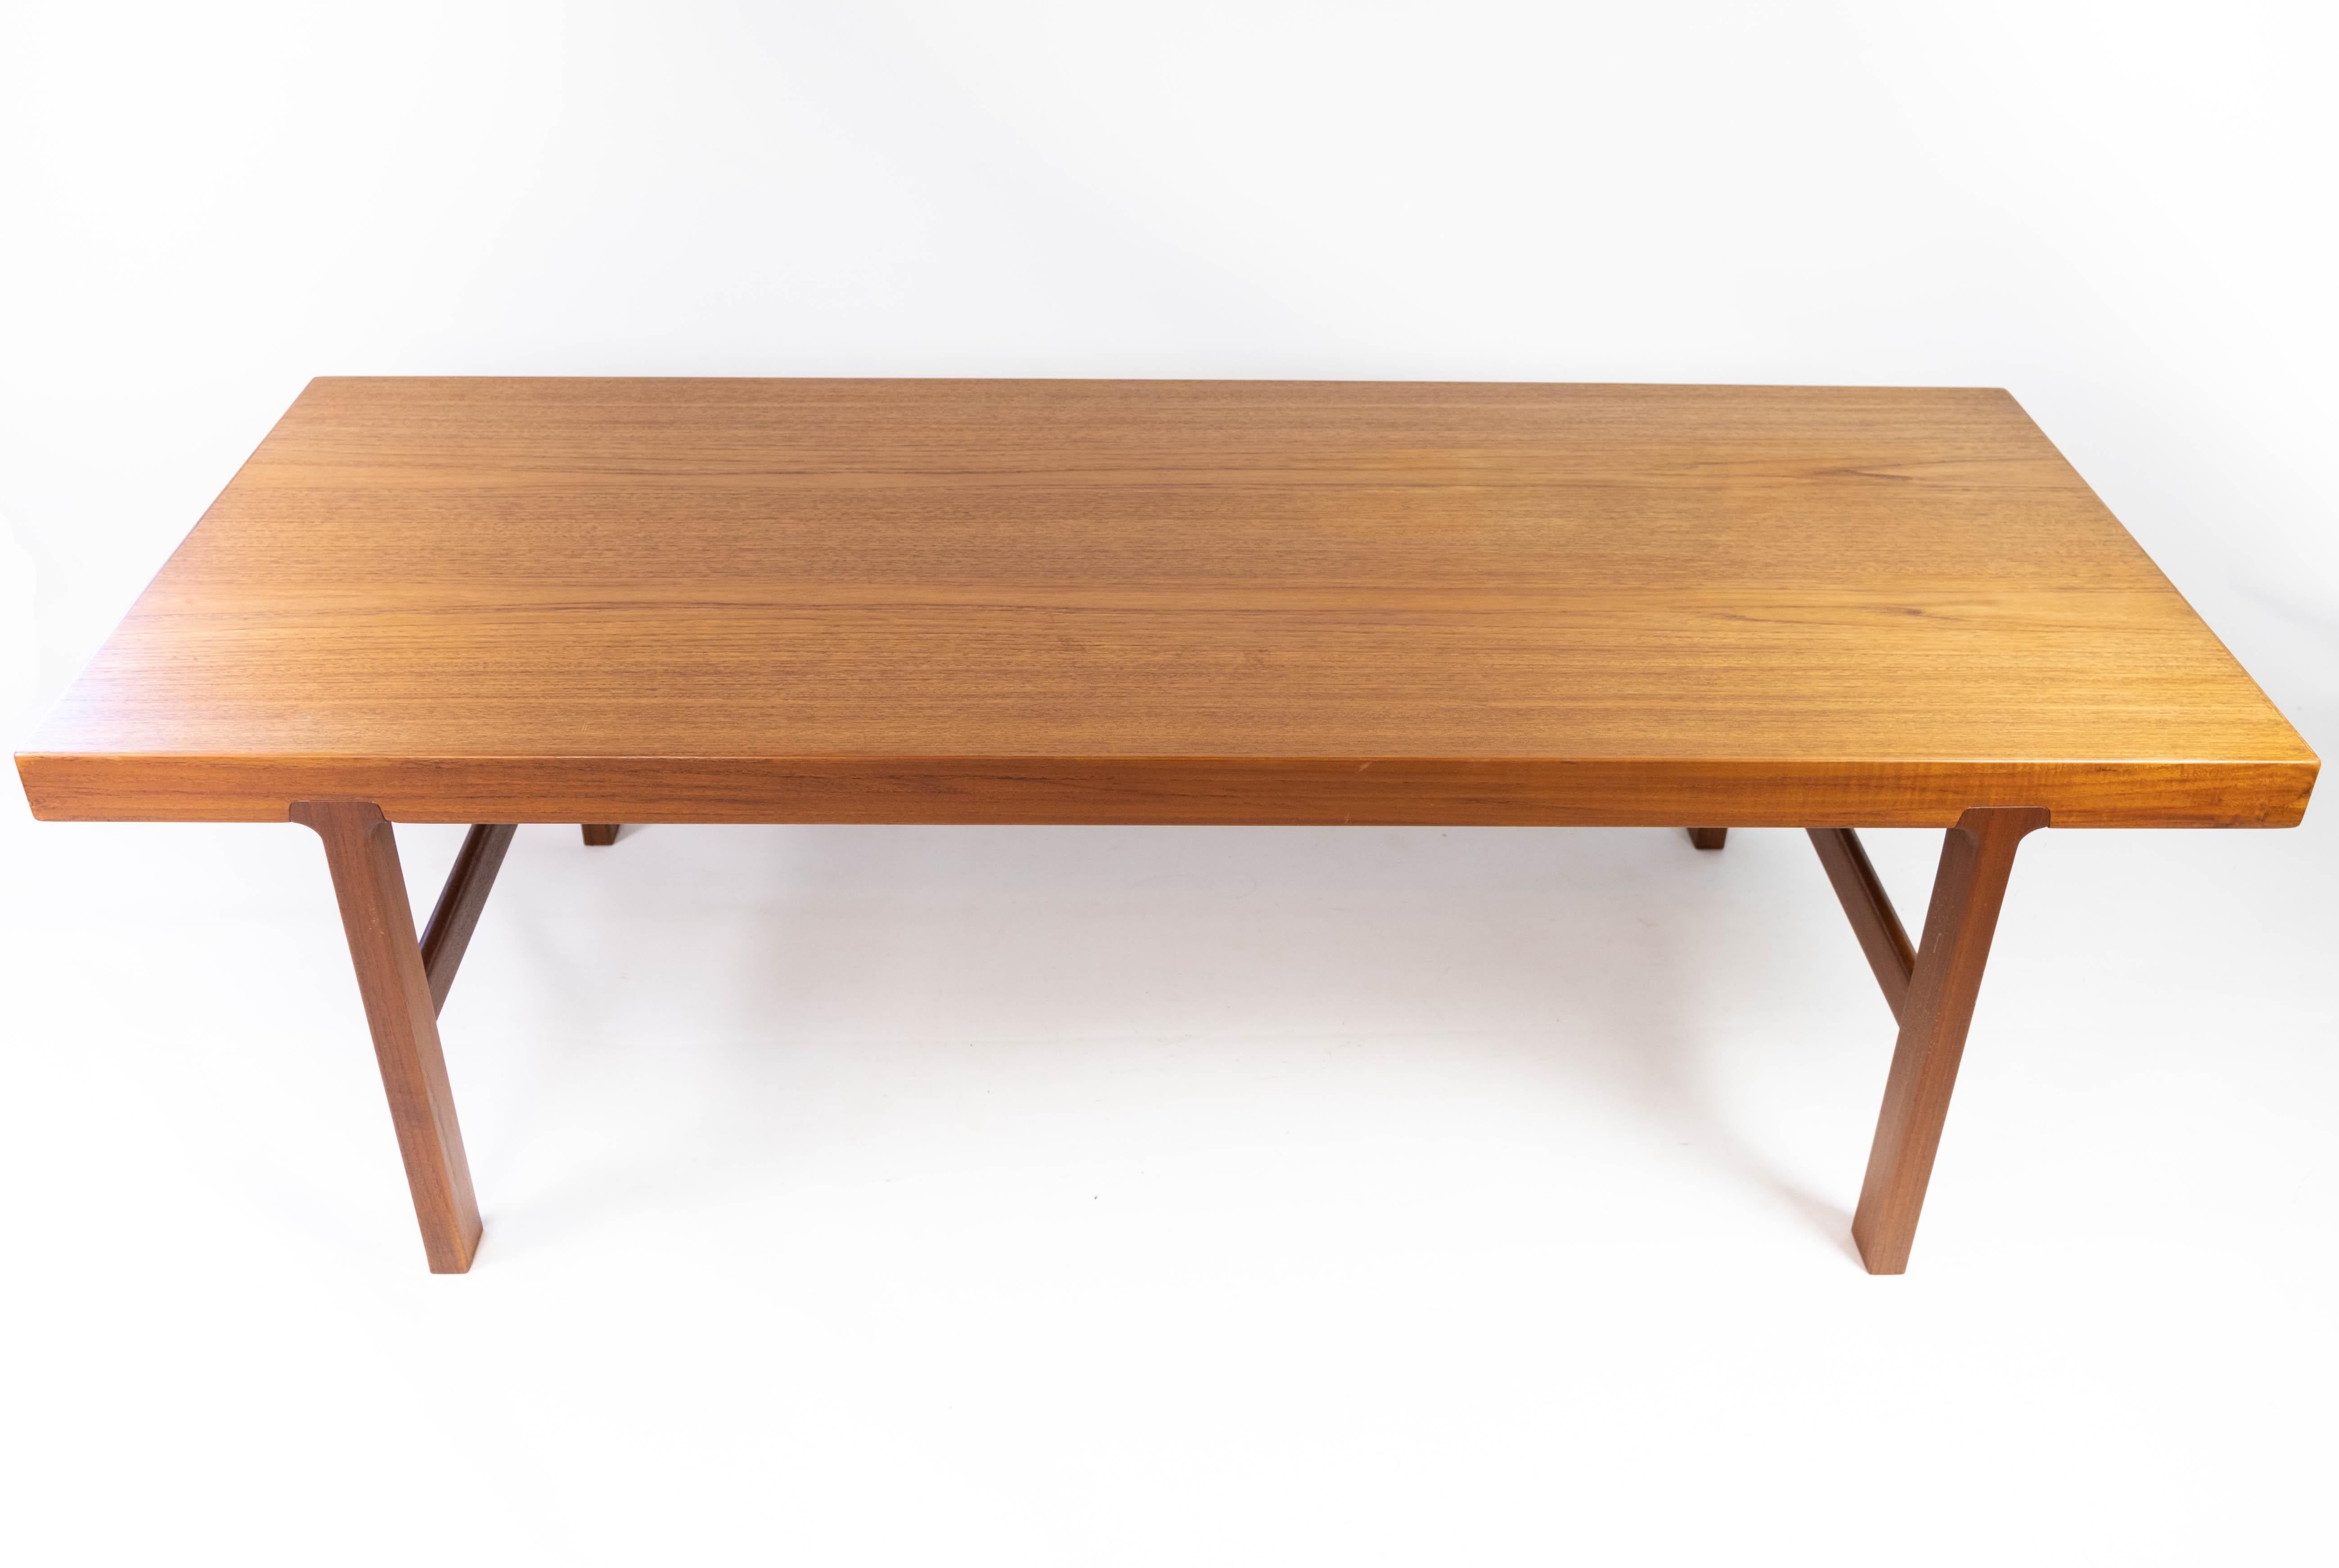 This Danish-designed coffee table from the 1960s is a testament to the era's commitment to both form and function. Crafted from teak, a wood prized for its rich color and durability, this table exudes warmth and sophistication.

The standout feature